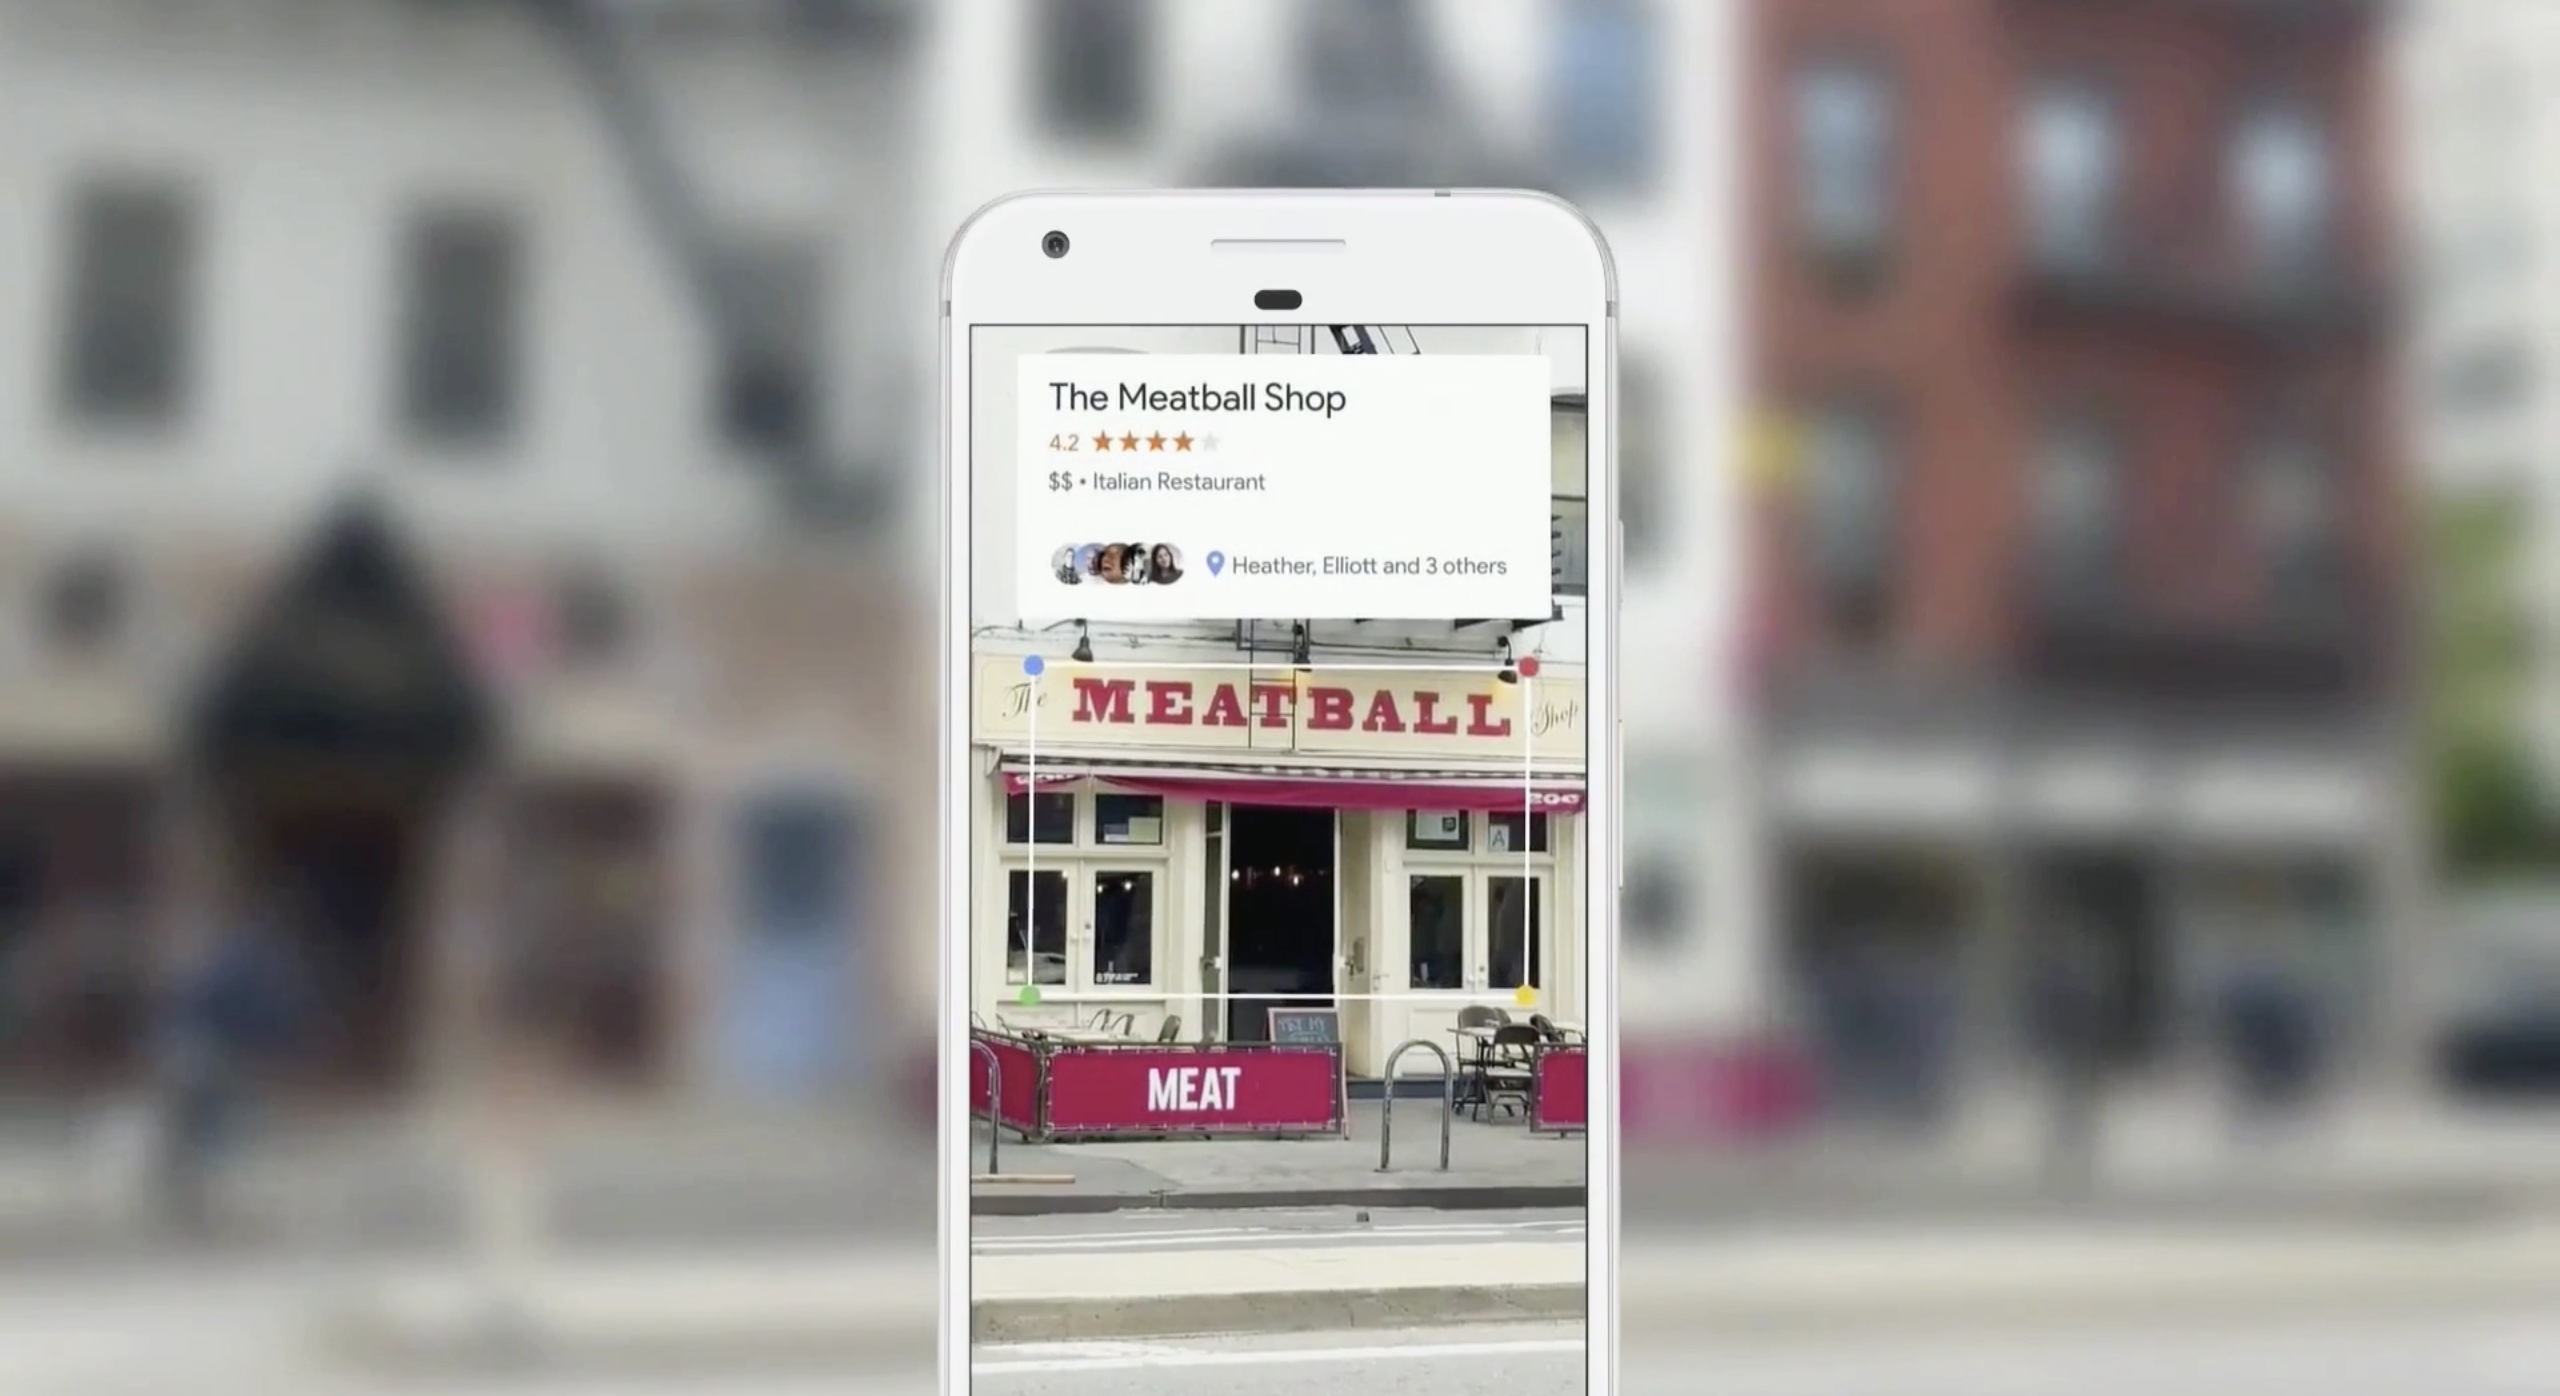 Google Lens will help consumers make informed decisions about the world around them, such as choosing a restaurant via reviews. Google Lens represents the next step in contextual commerce.